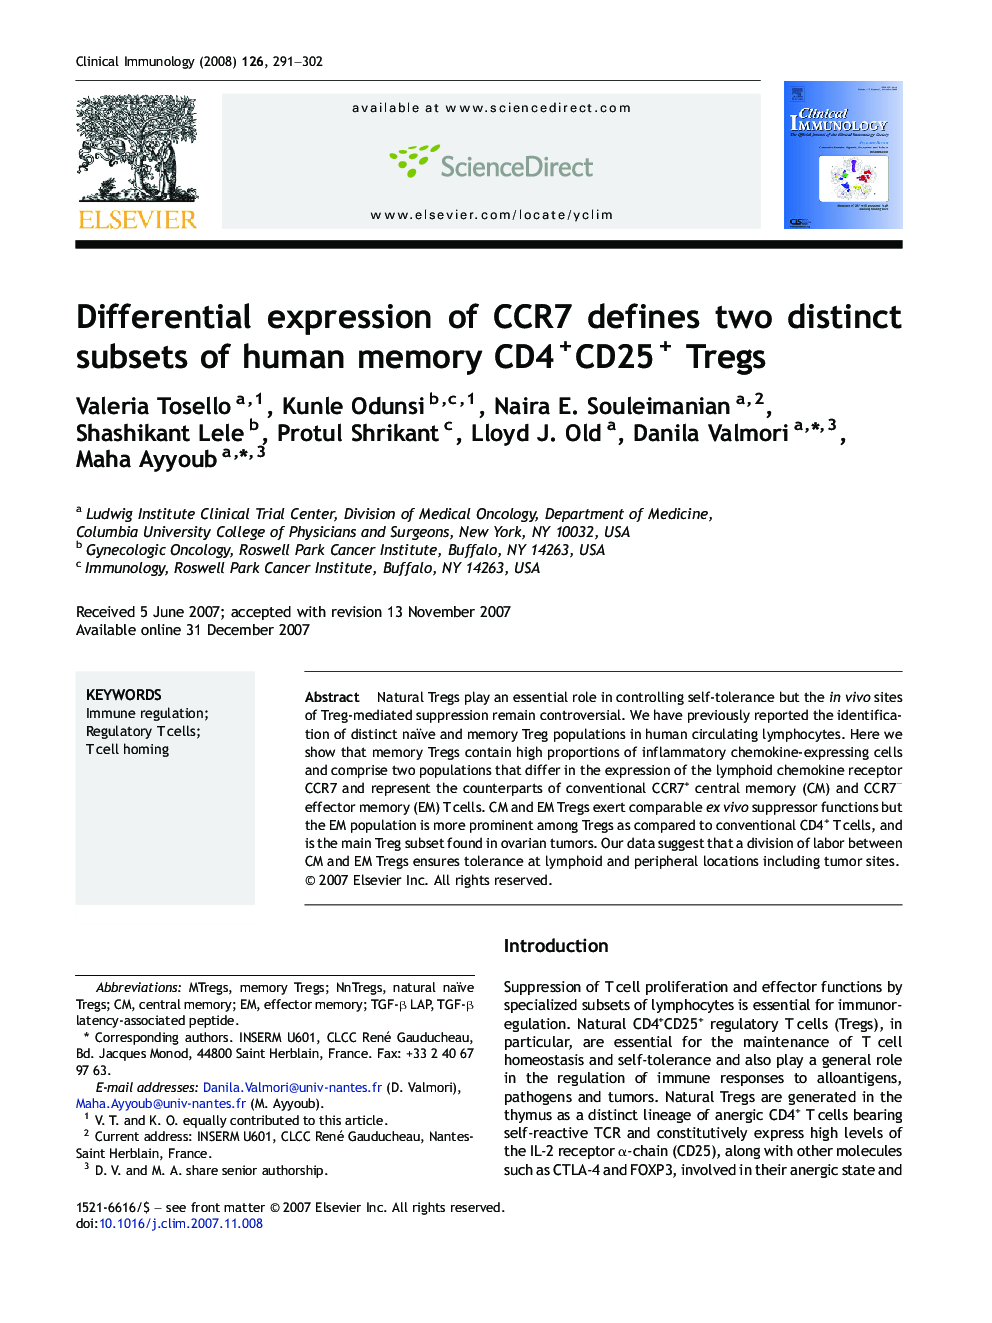 Differential expression of CCR7 defines two distinct subsets of human memory CD4+CD25+ Tregs